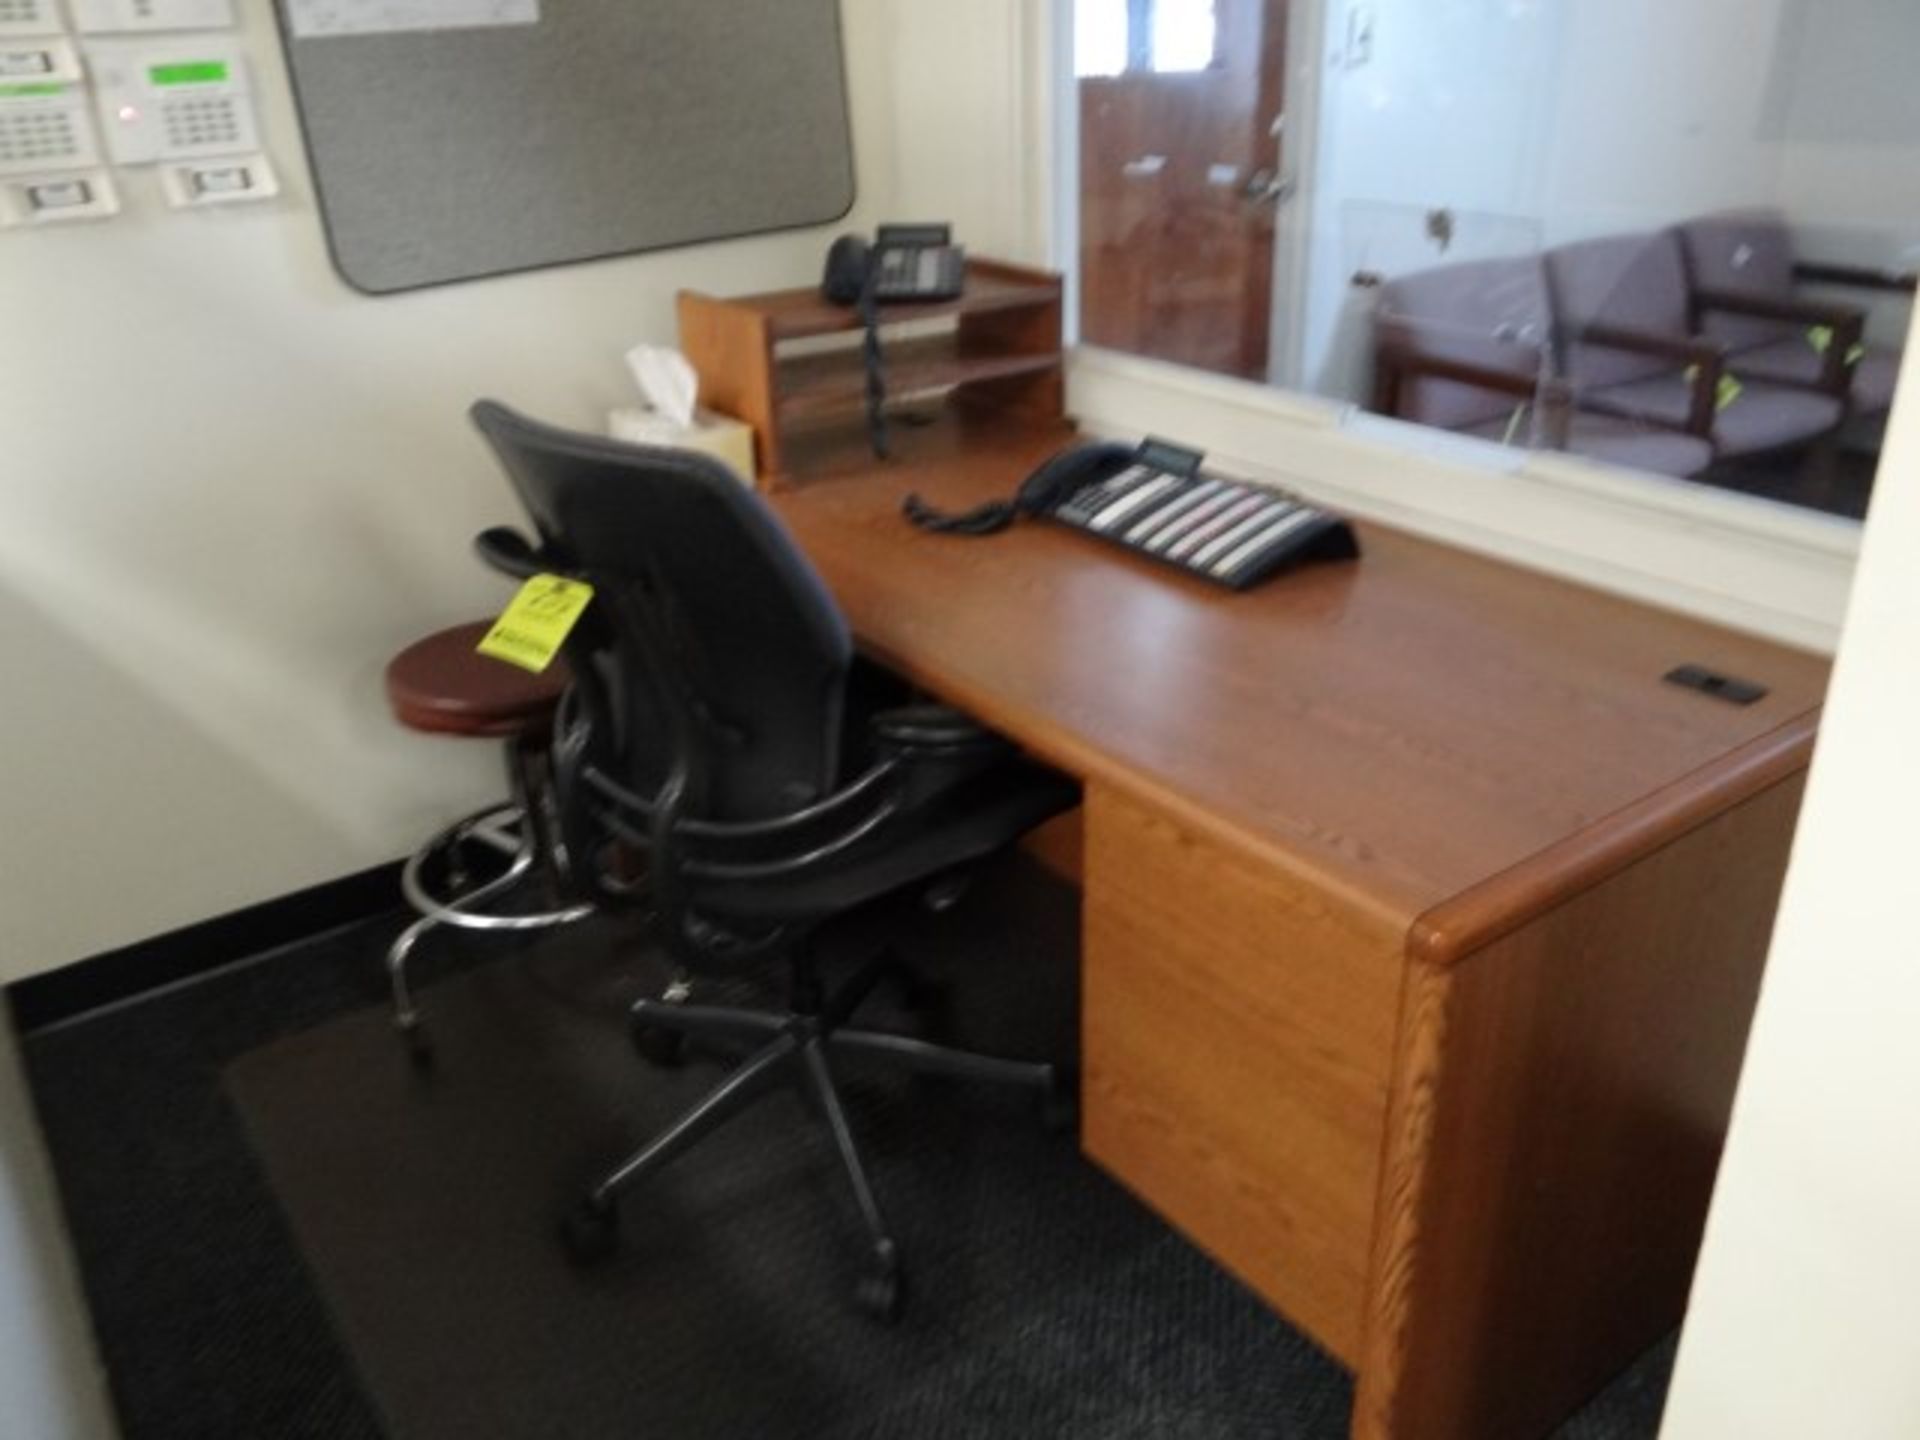 Reception Area, Desk, Armchairs, Cicular Table - Image 2 of 2